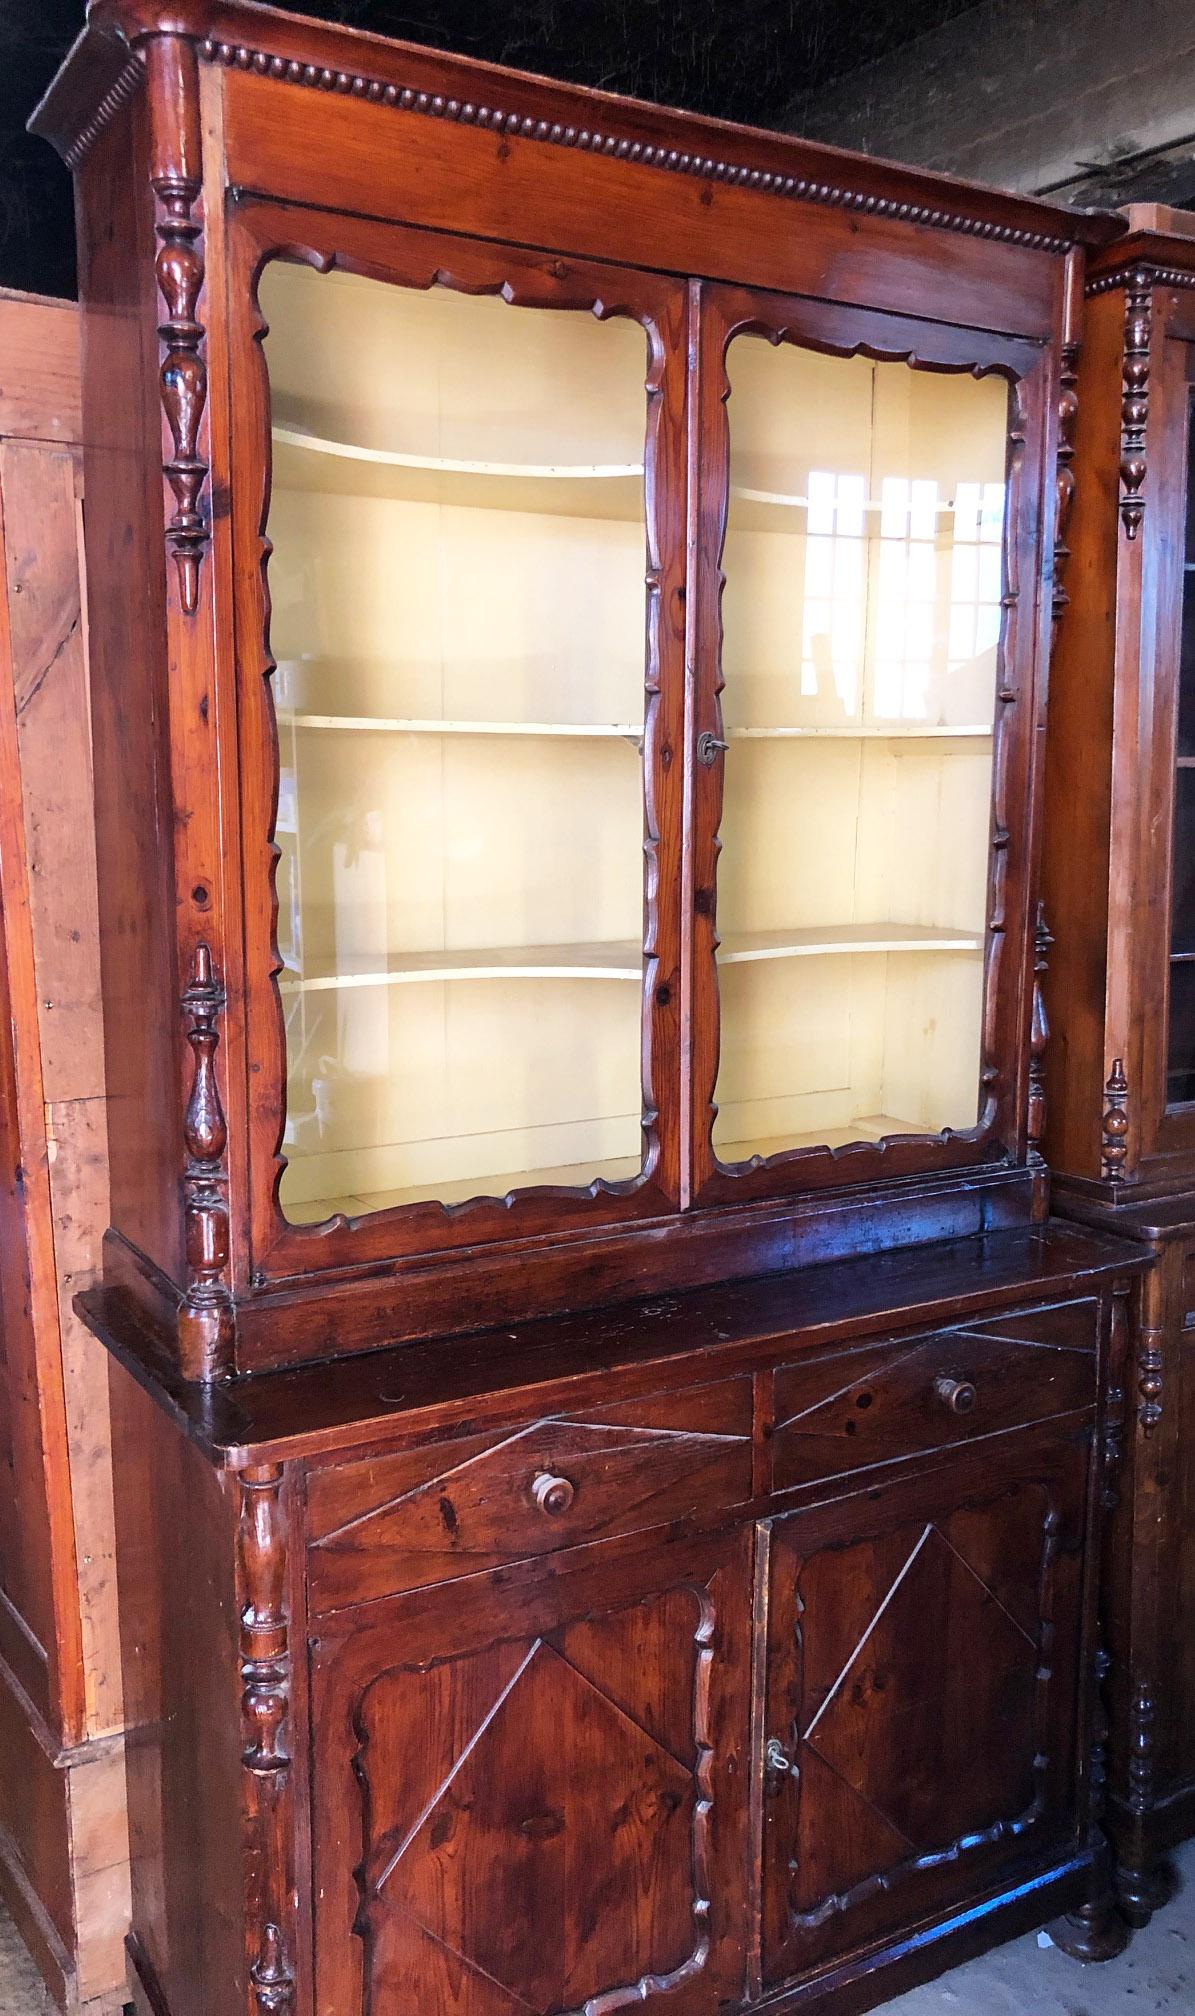 Original Tuscan showcase, with two doors, in larch, with two drawers.
Doors with very particular processing
Rustic style
Period: about 1830
Size: 128 x 55 x 233 H.
Comes from an old country house in the Florence area of Tuscany.
The paint is